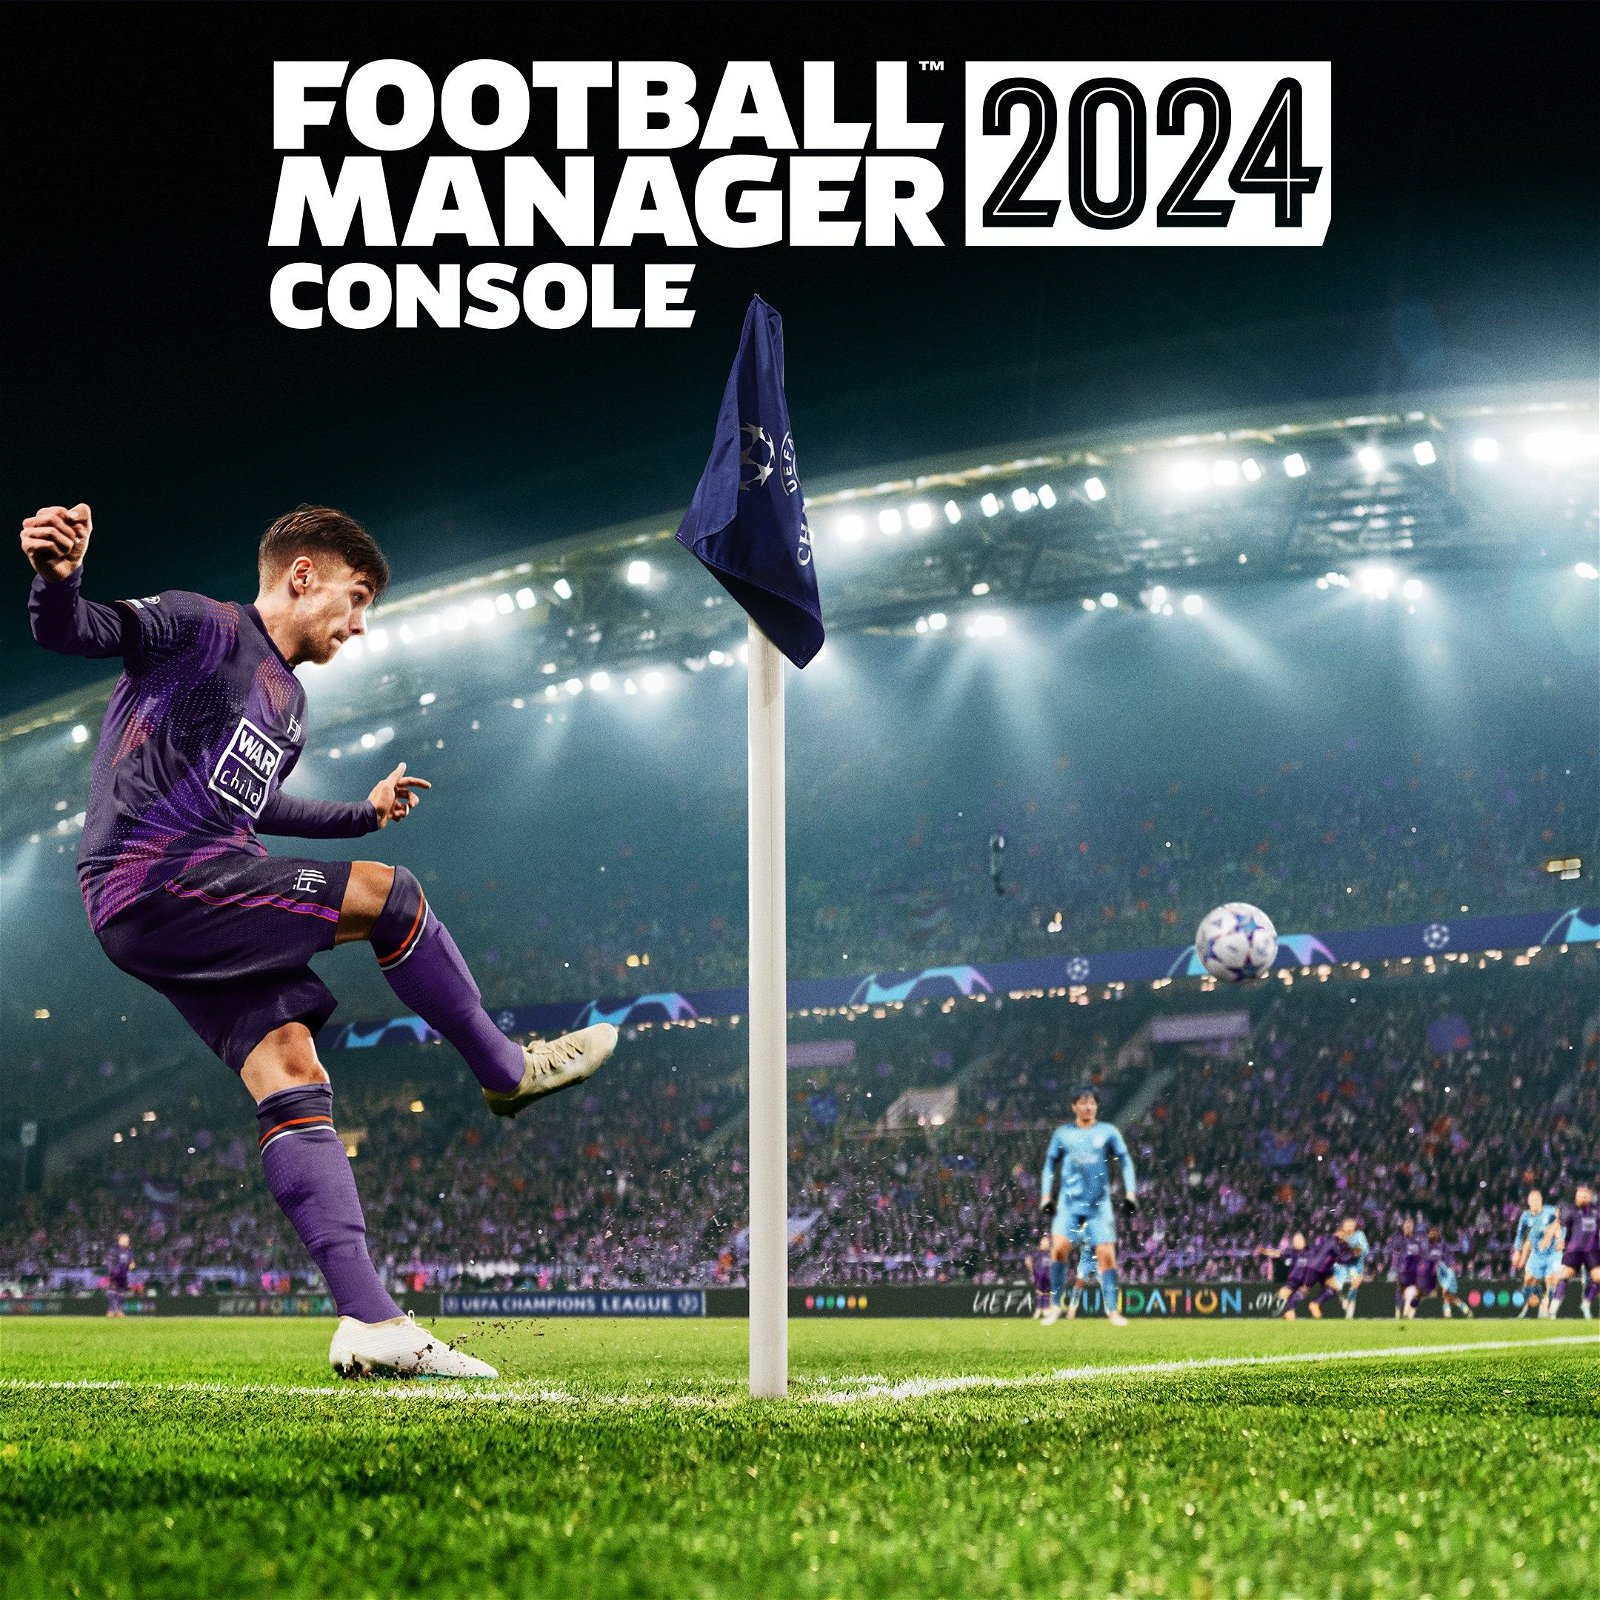 Image of Football Manager 2024 Console